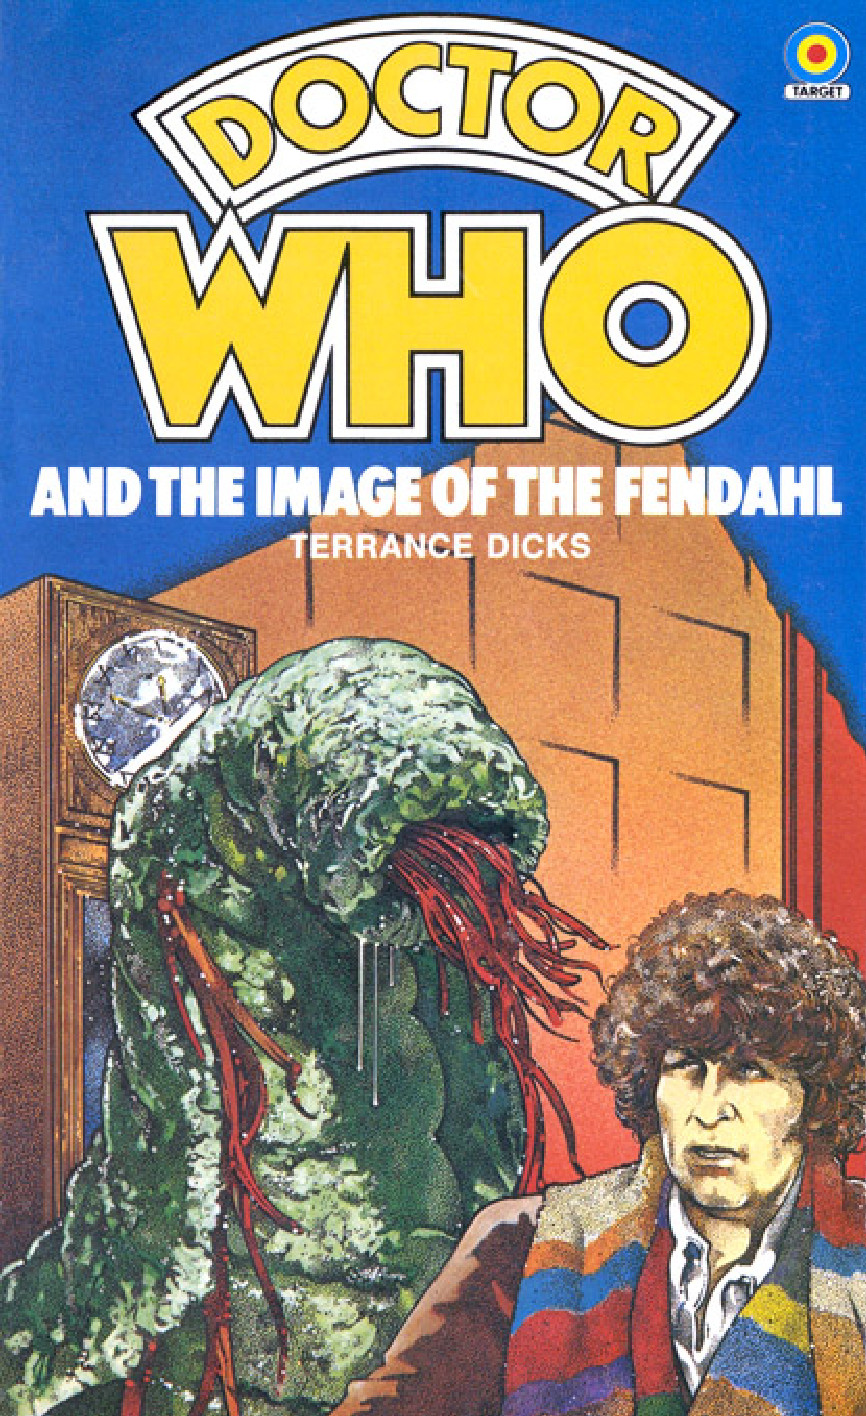 Doctor Who: The Image of the Fendahl